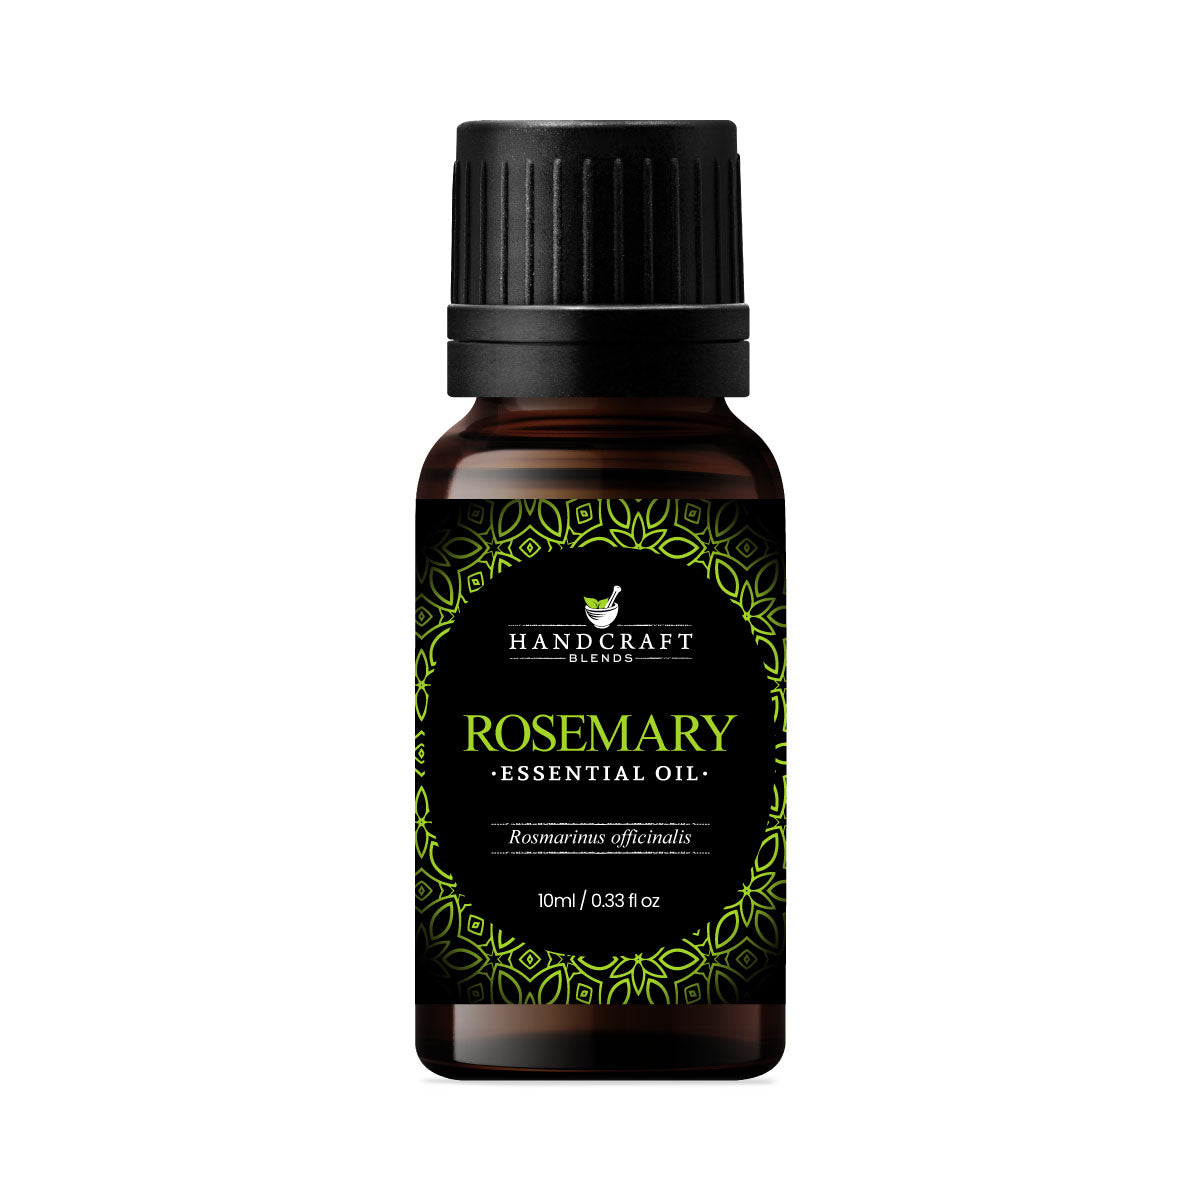 Rosemary Essential Oil (Spain), Uses, Benefits, and Blends